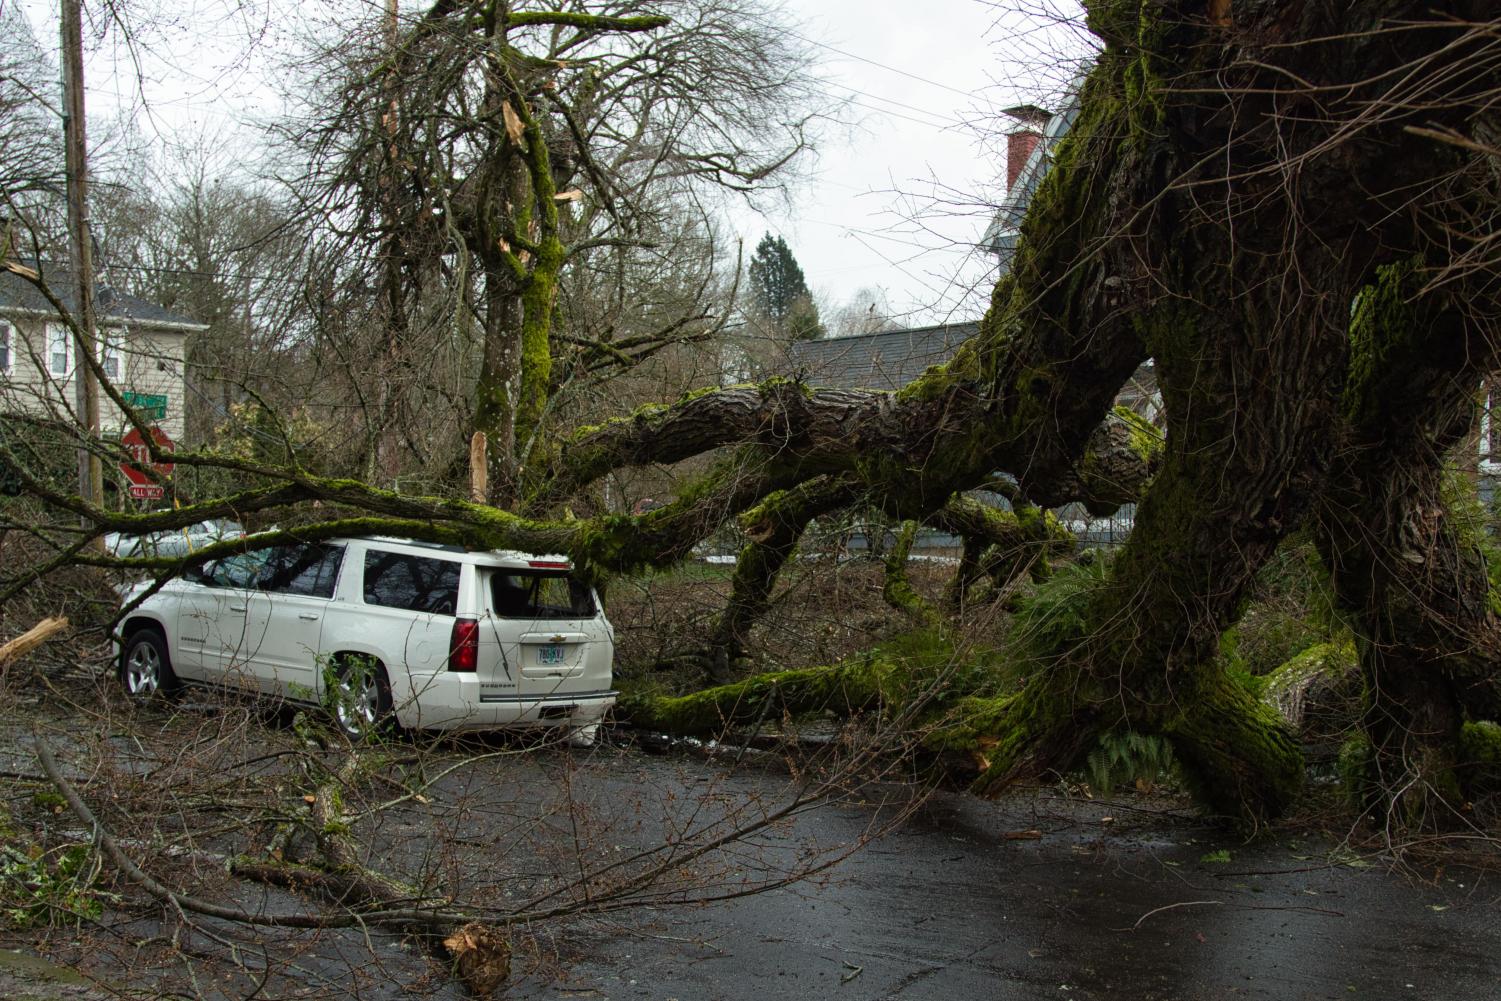 Portland+Ice+Storm+Topples+Trees+and+Powerlines%2C+Causing+Mass+Power+Outages+for+La+Salle+Students